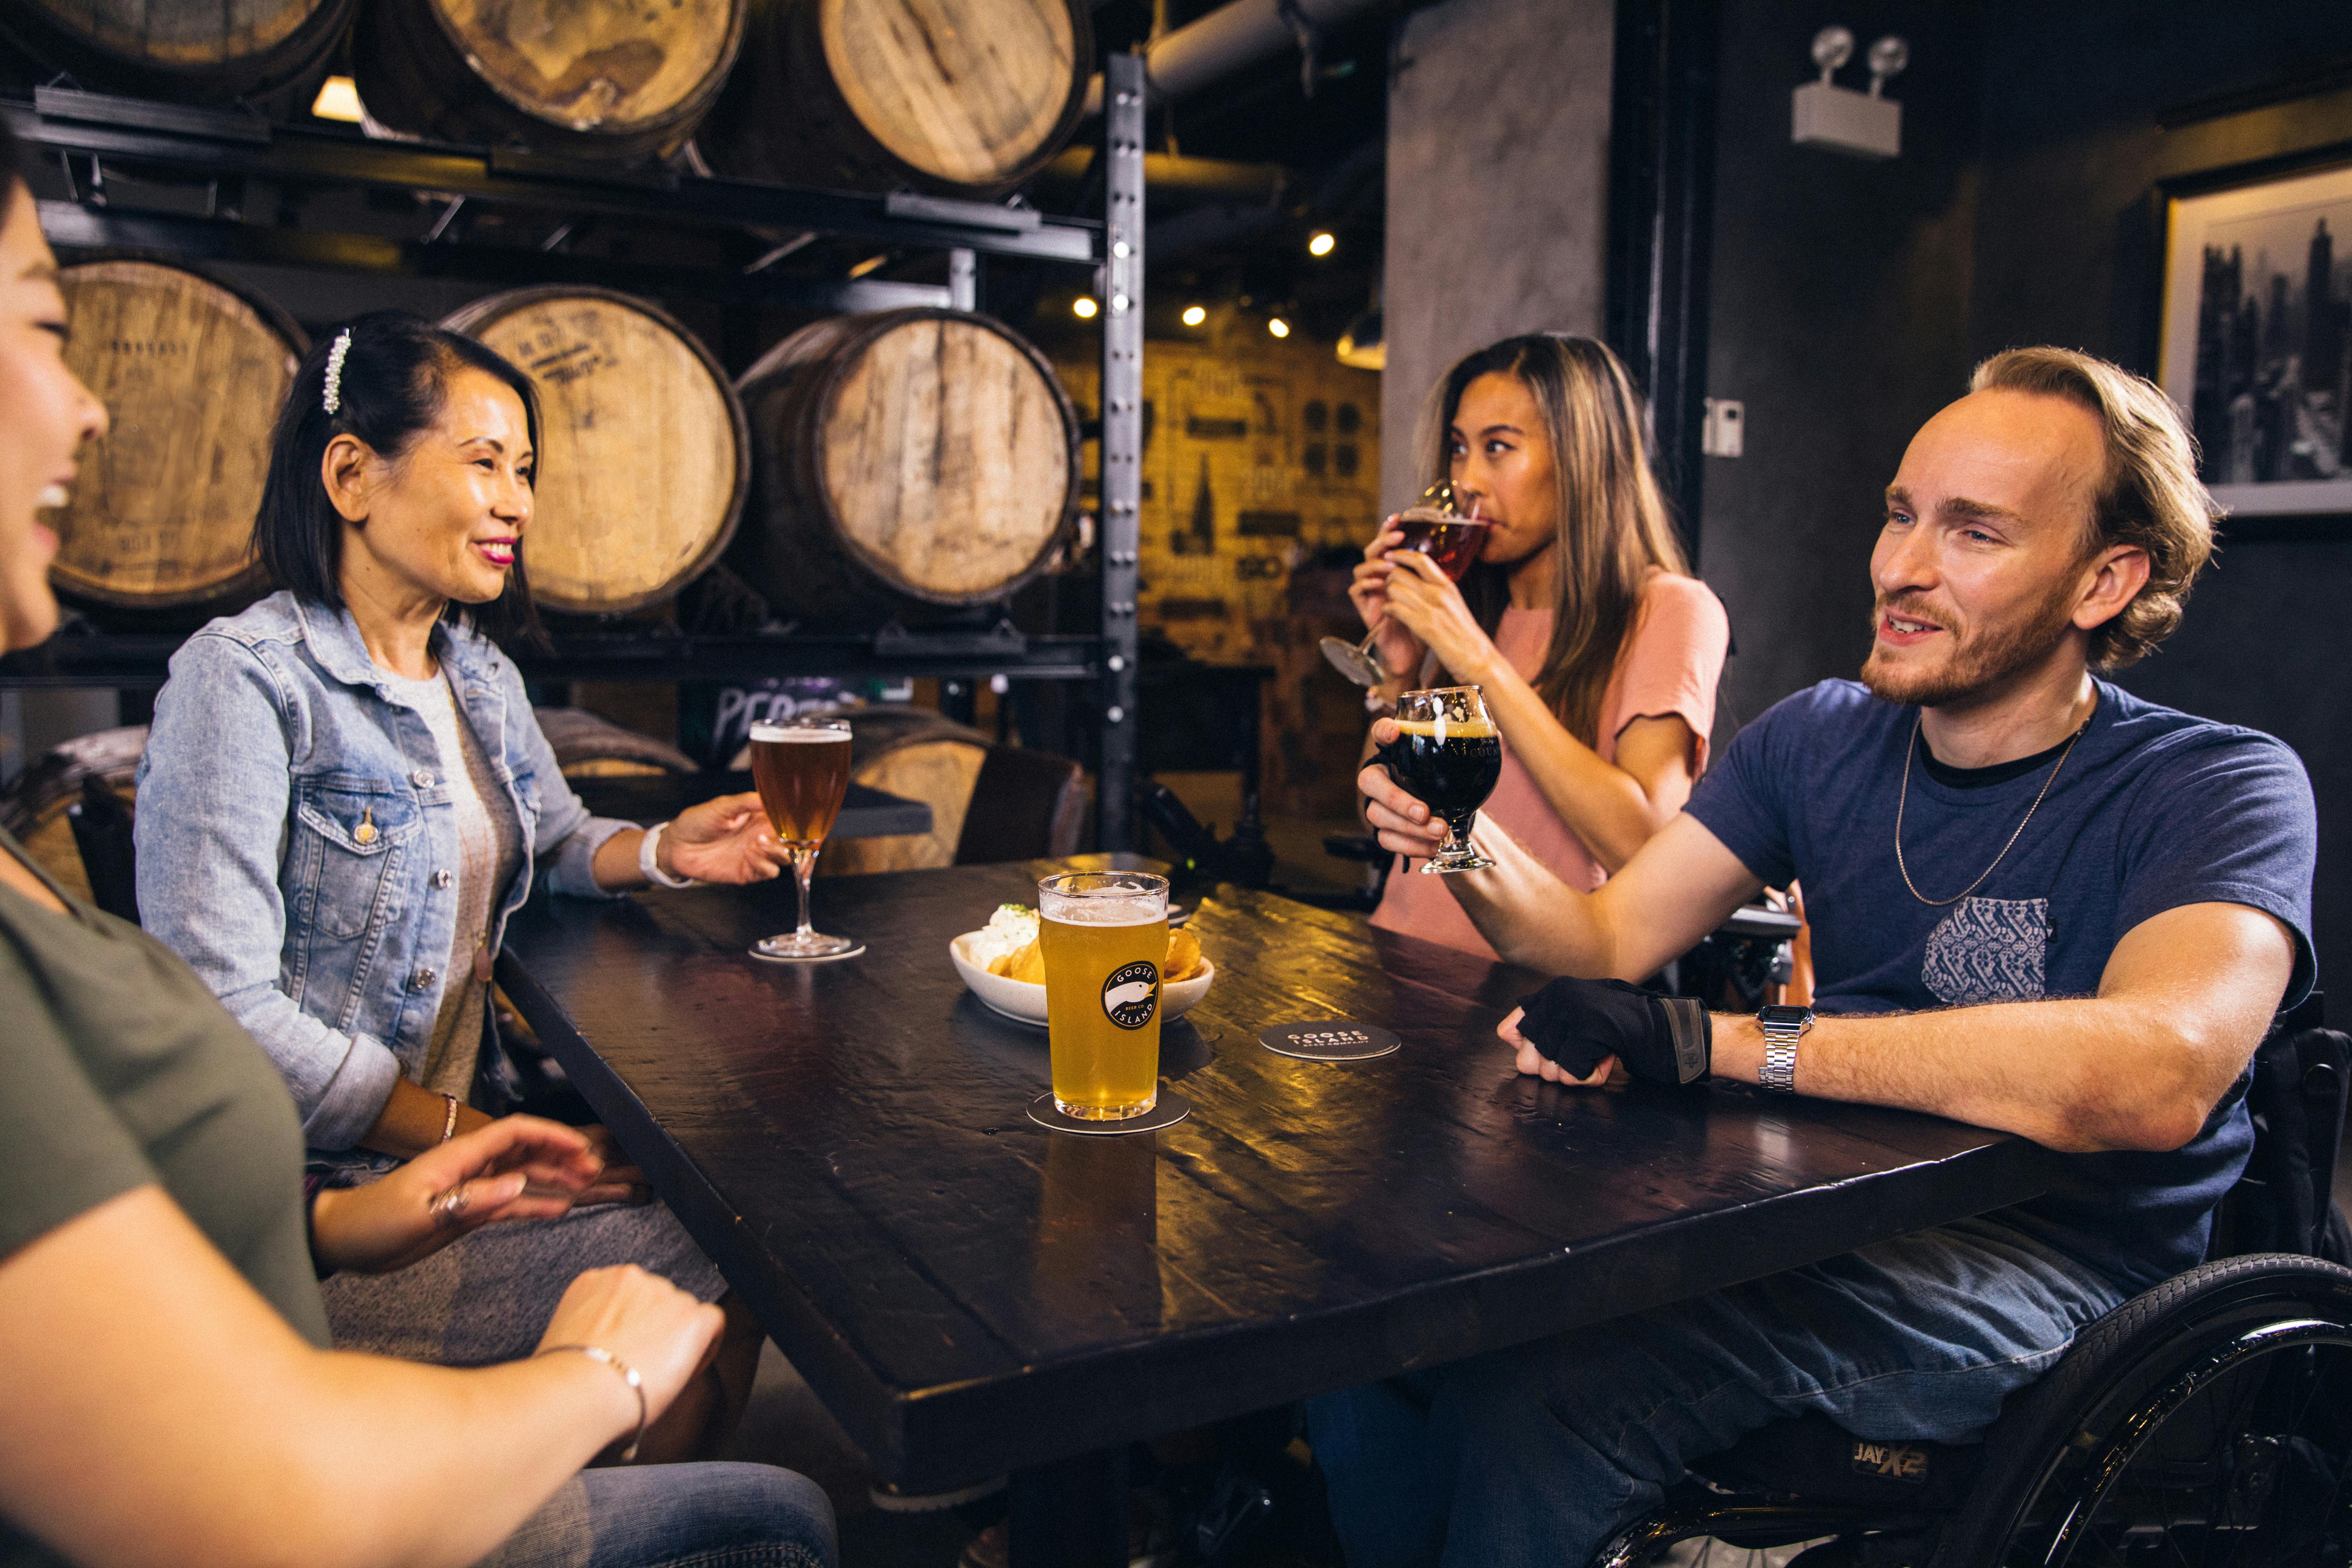 People seated around a table and drinking beer | Source: Pexels